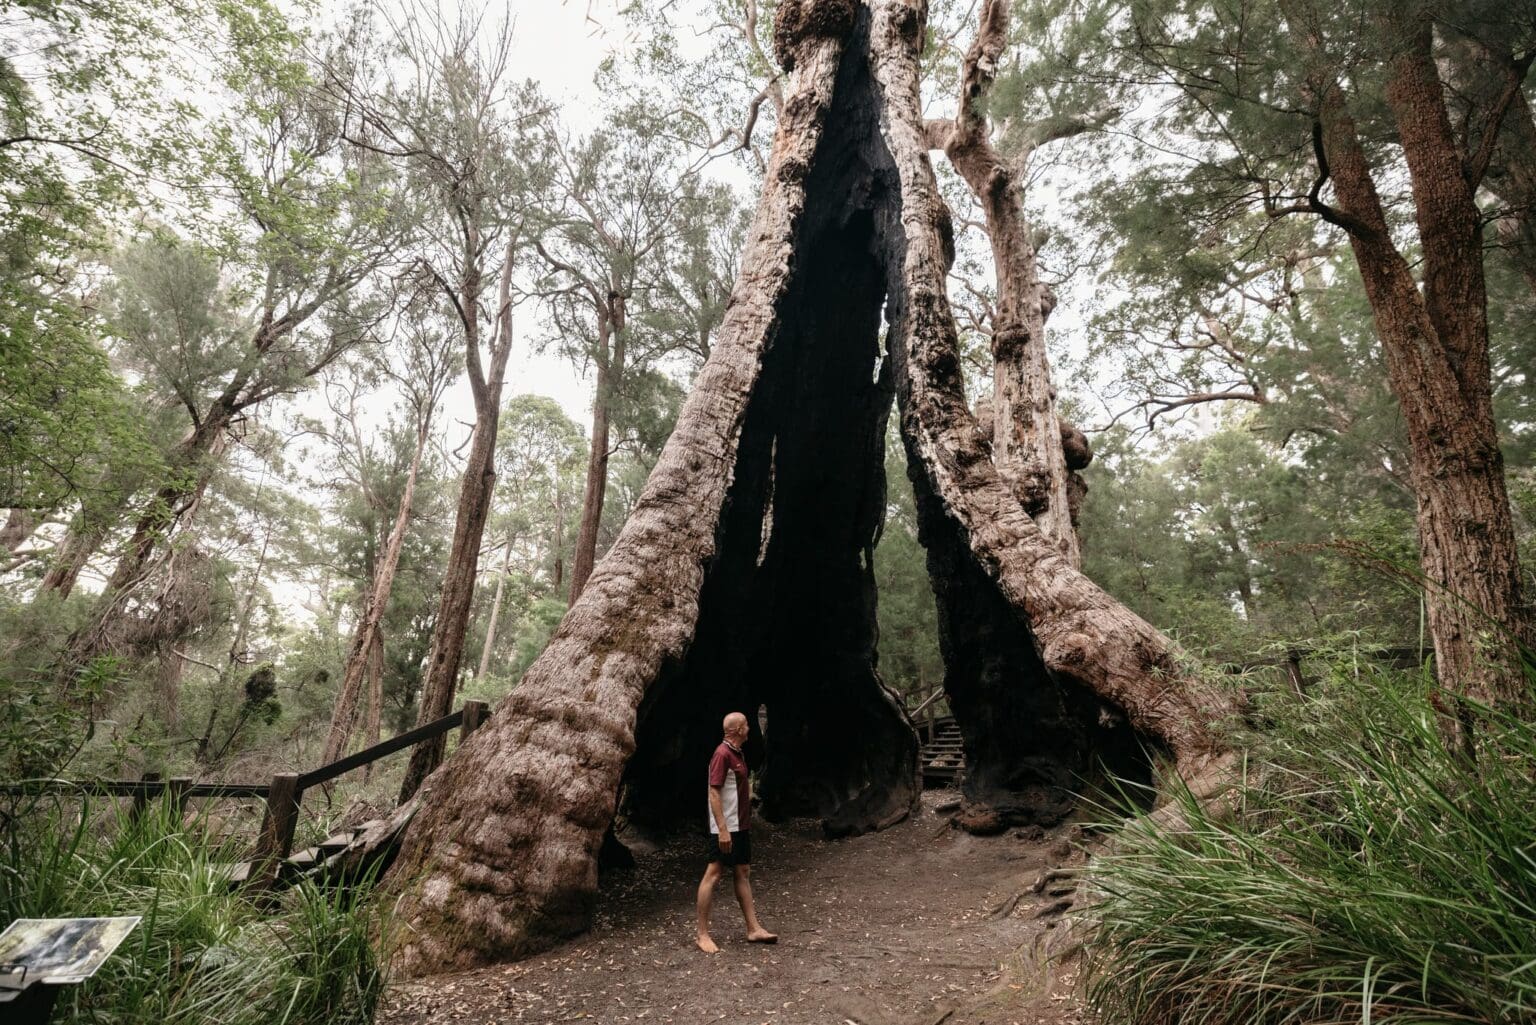 A man looking up at a giant tingle tree